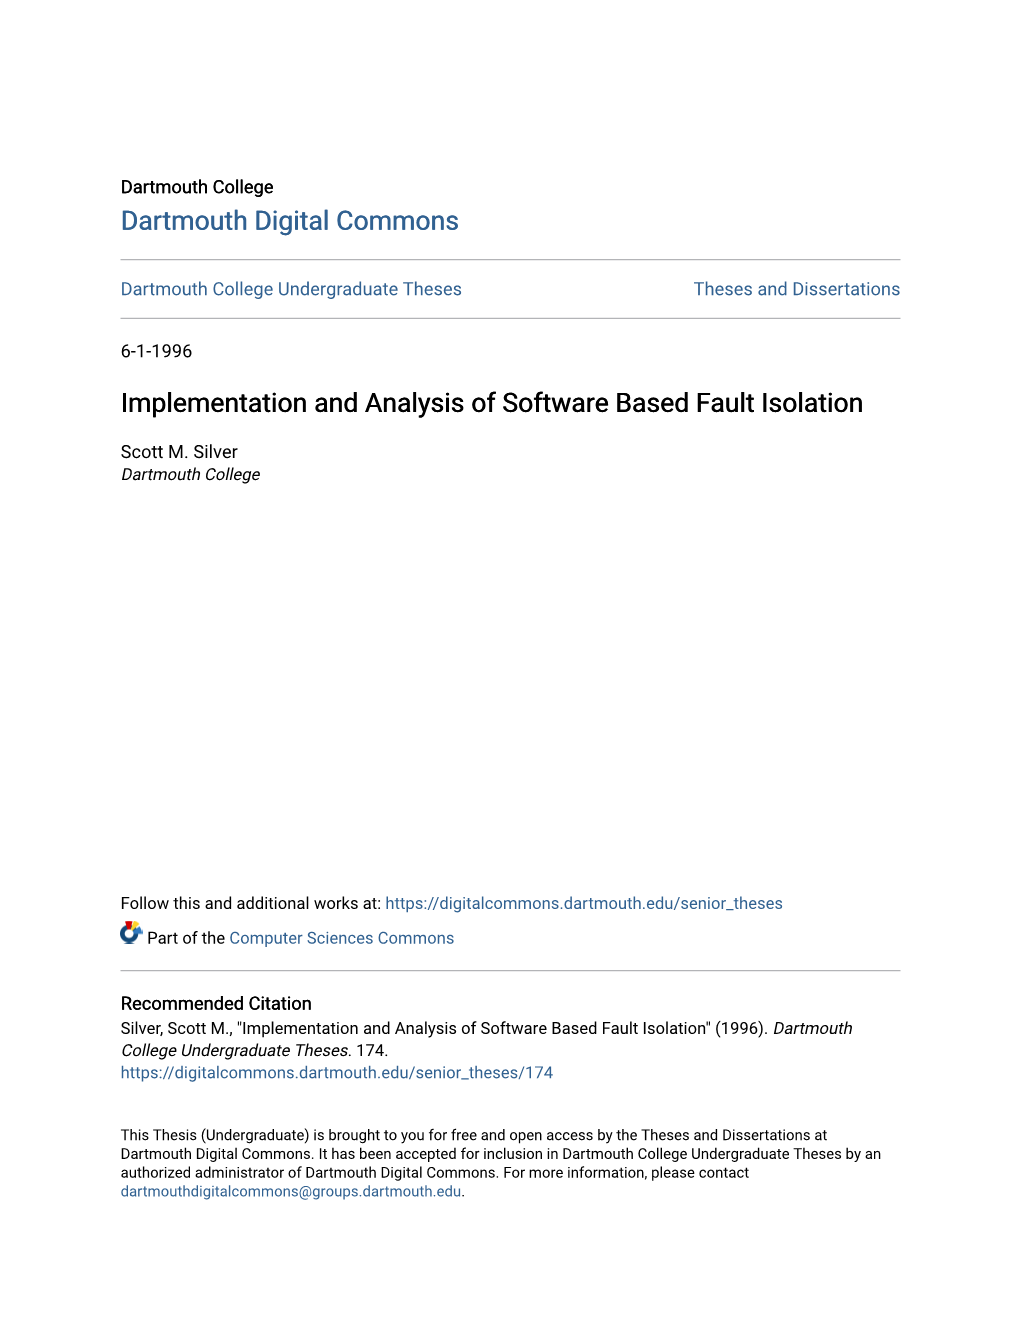 Implementation and Analysis of Software Based Fault Isolation